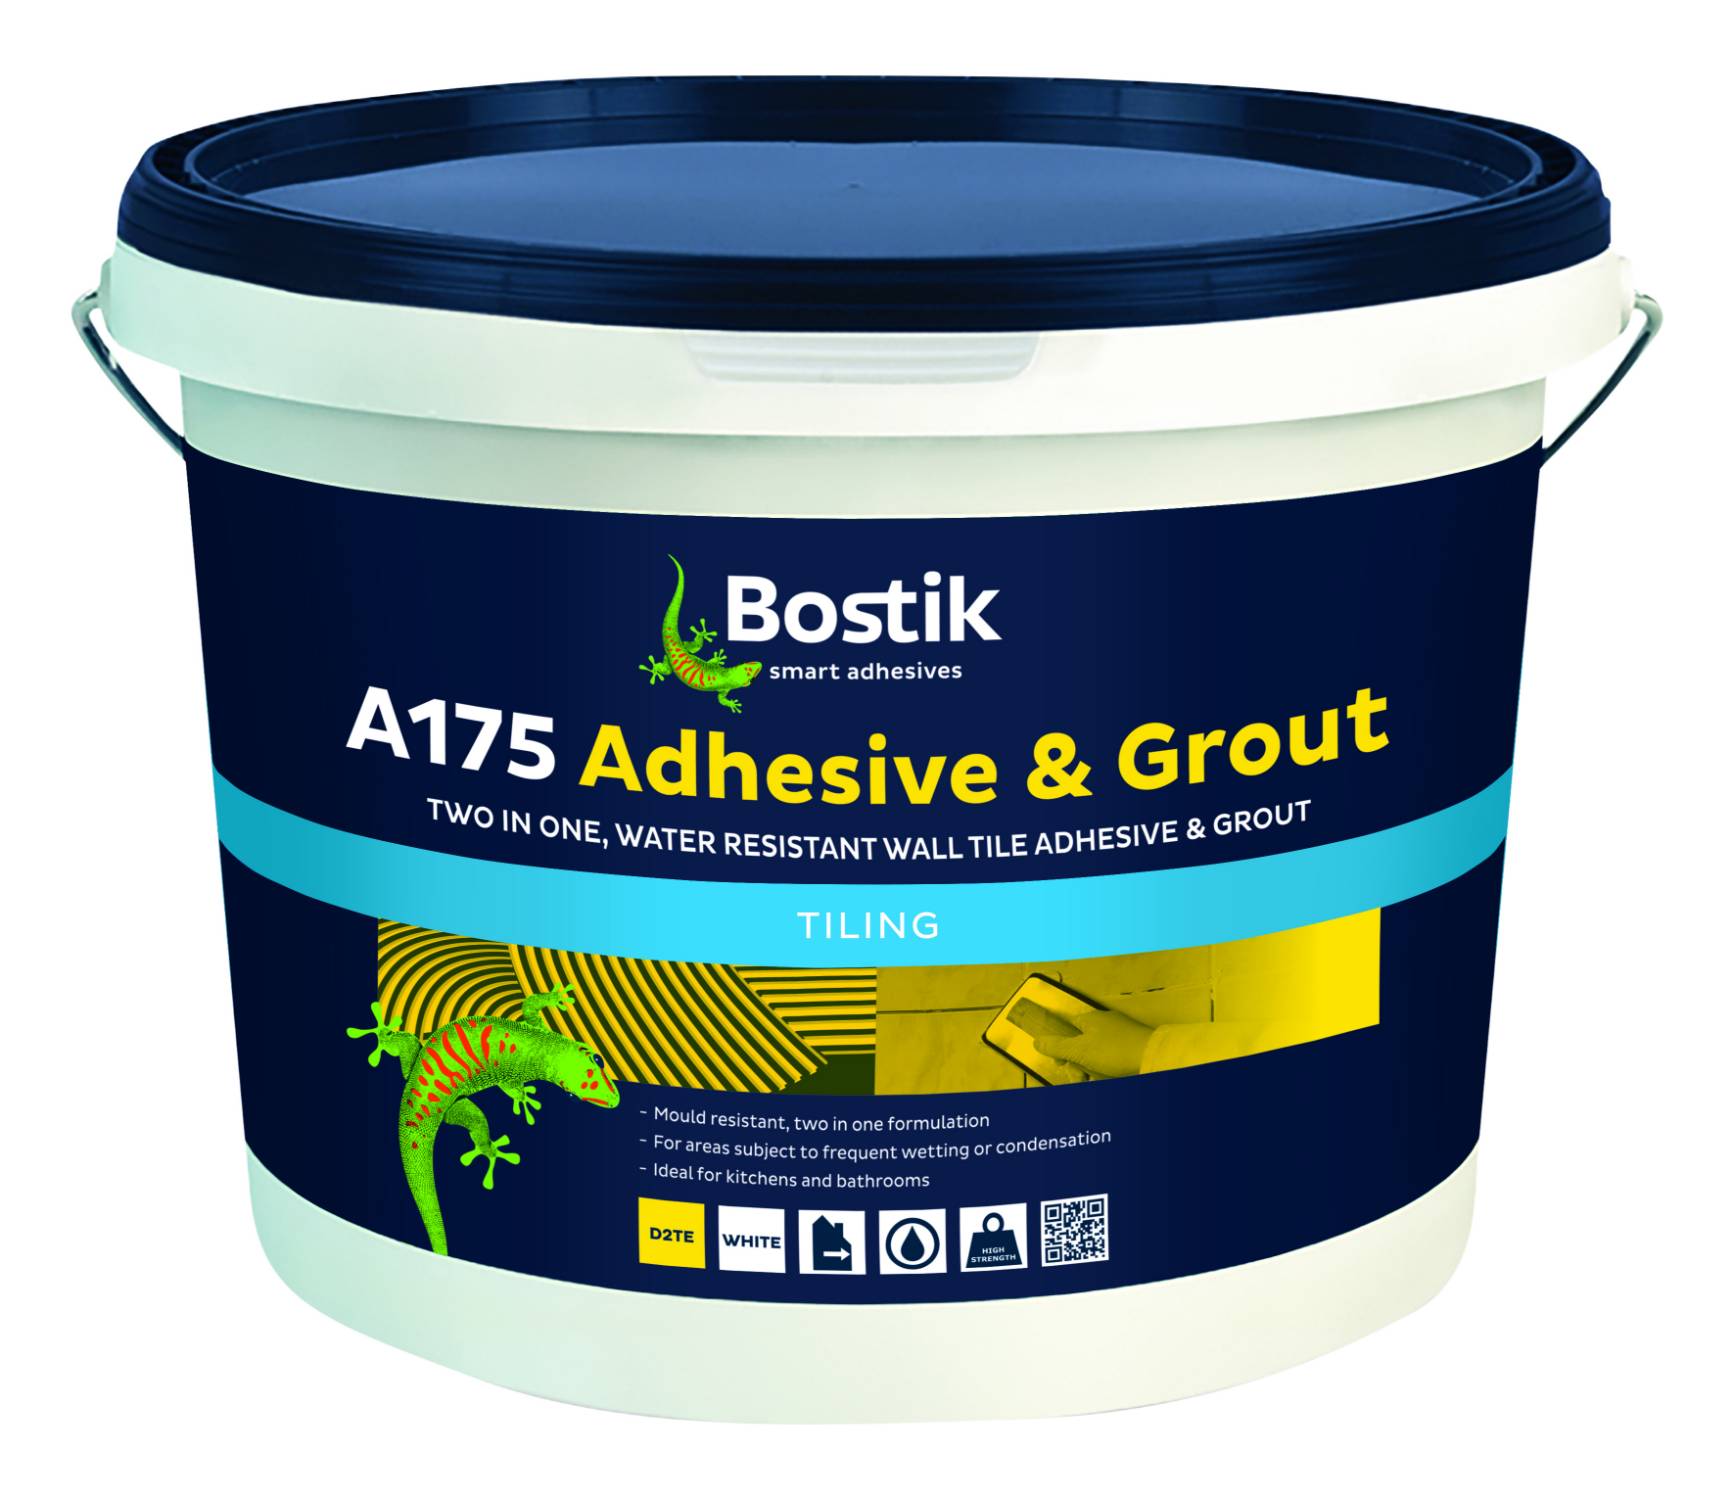 A175 Adhesive & Grout